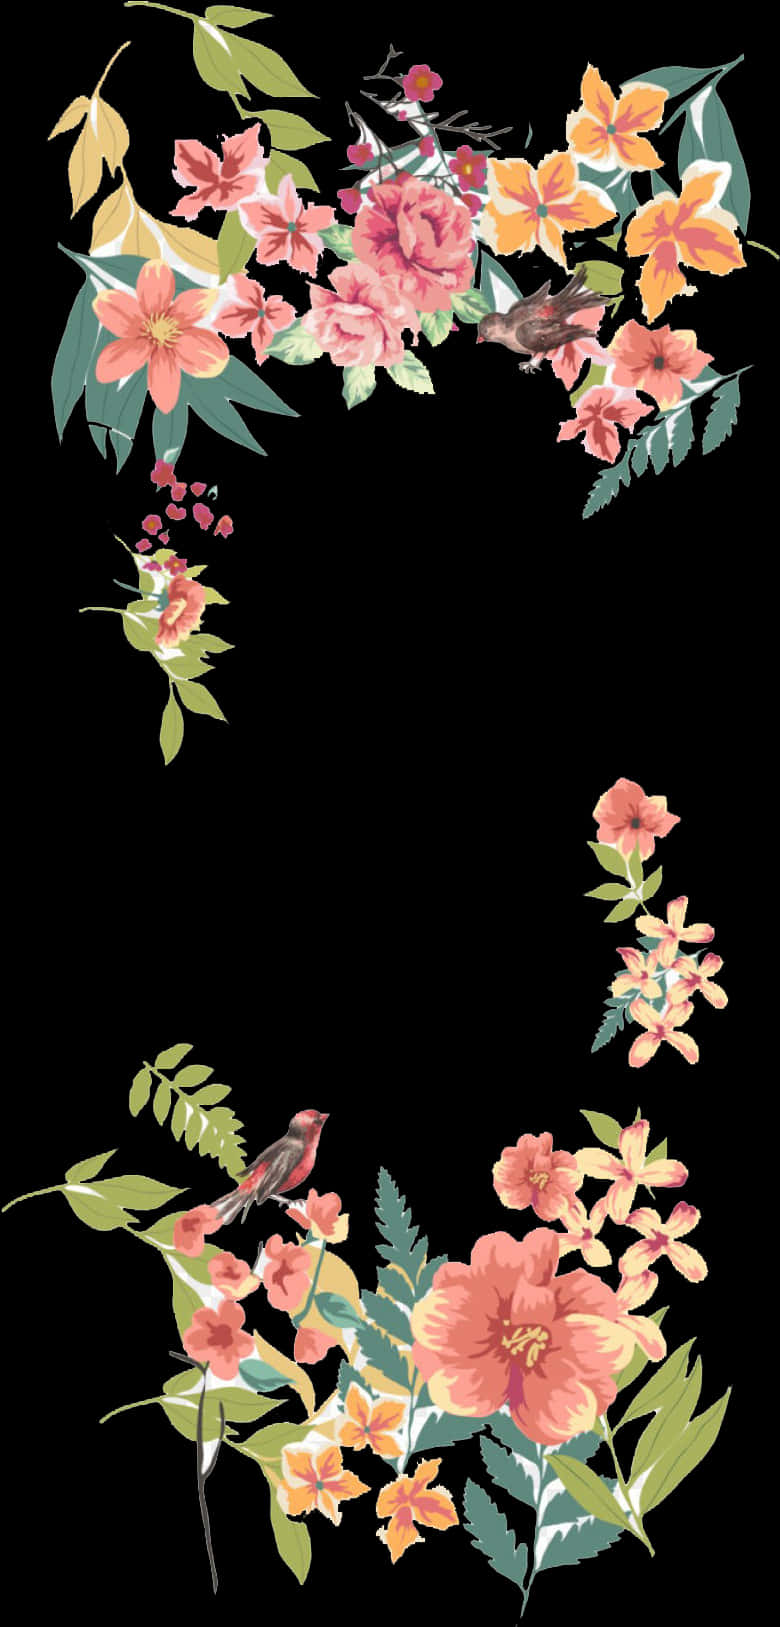 A Black Background With Flowers And Birds